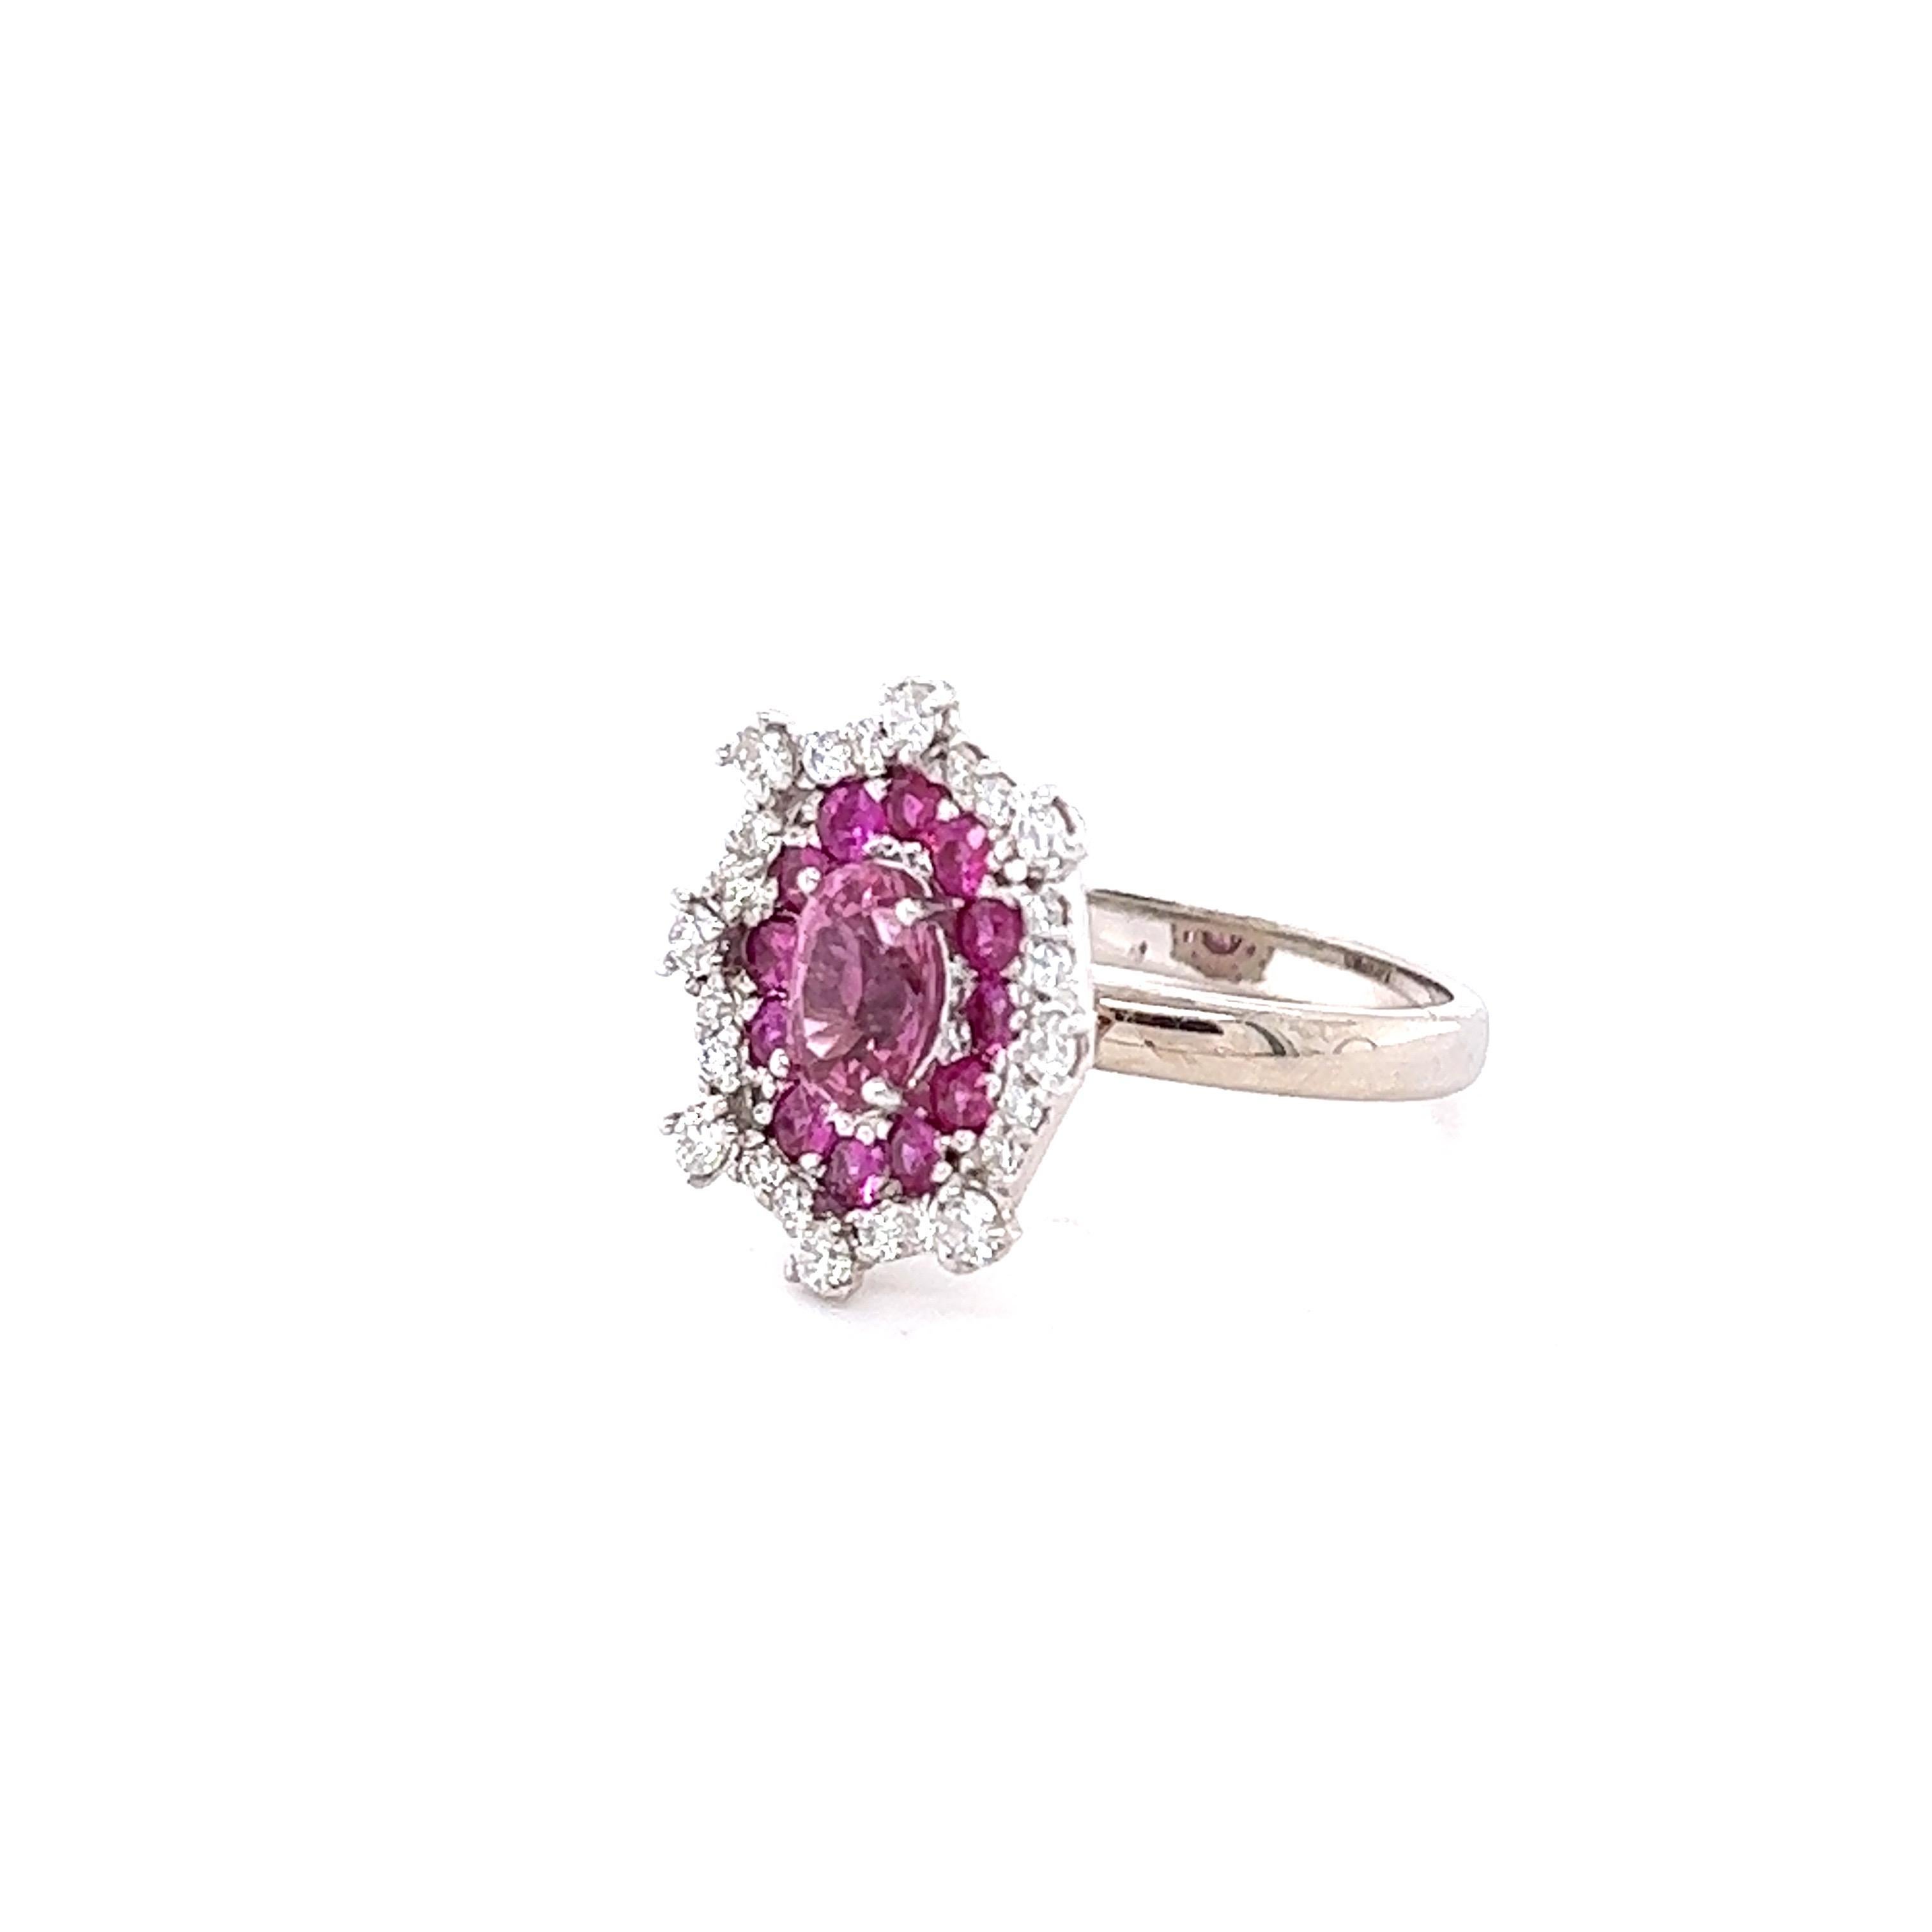 This ring has a Oval Cut Pink Sapphire that weighs 1.02 carats. The measurements of the Sapphire are approximately 7 mm x 5 mm. It also has 12 Round Cut Pink Sapphires that weigh 0.58 carats. There 24 Round Cut Diamonds on the shanks of the ring